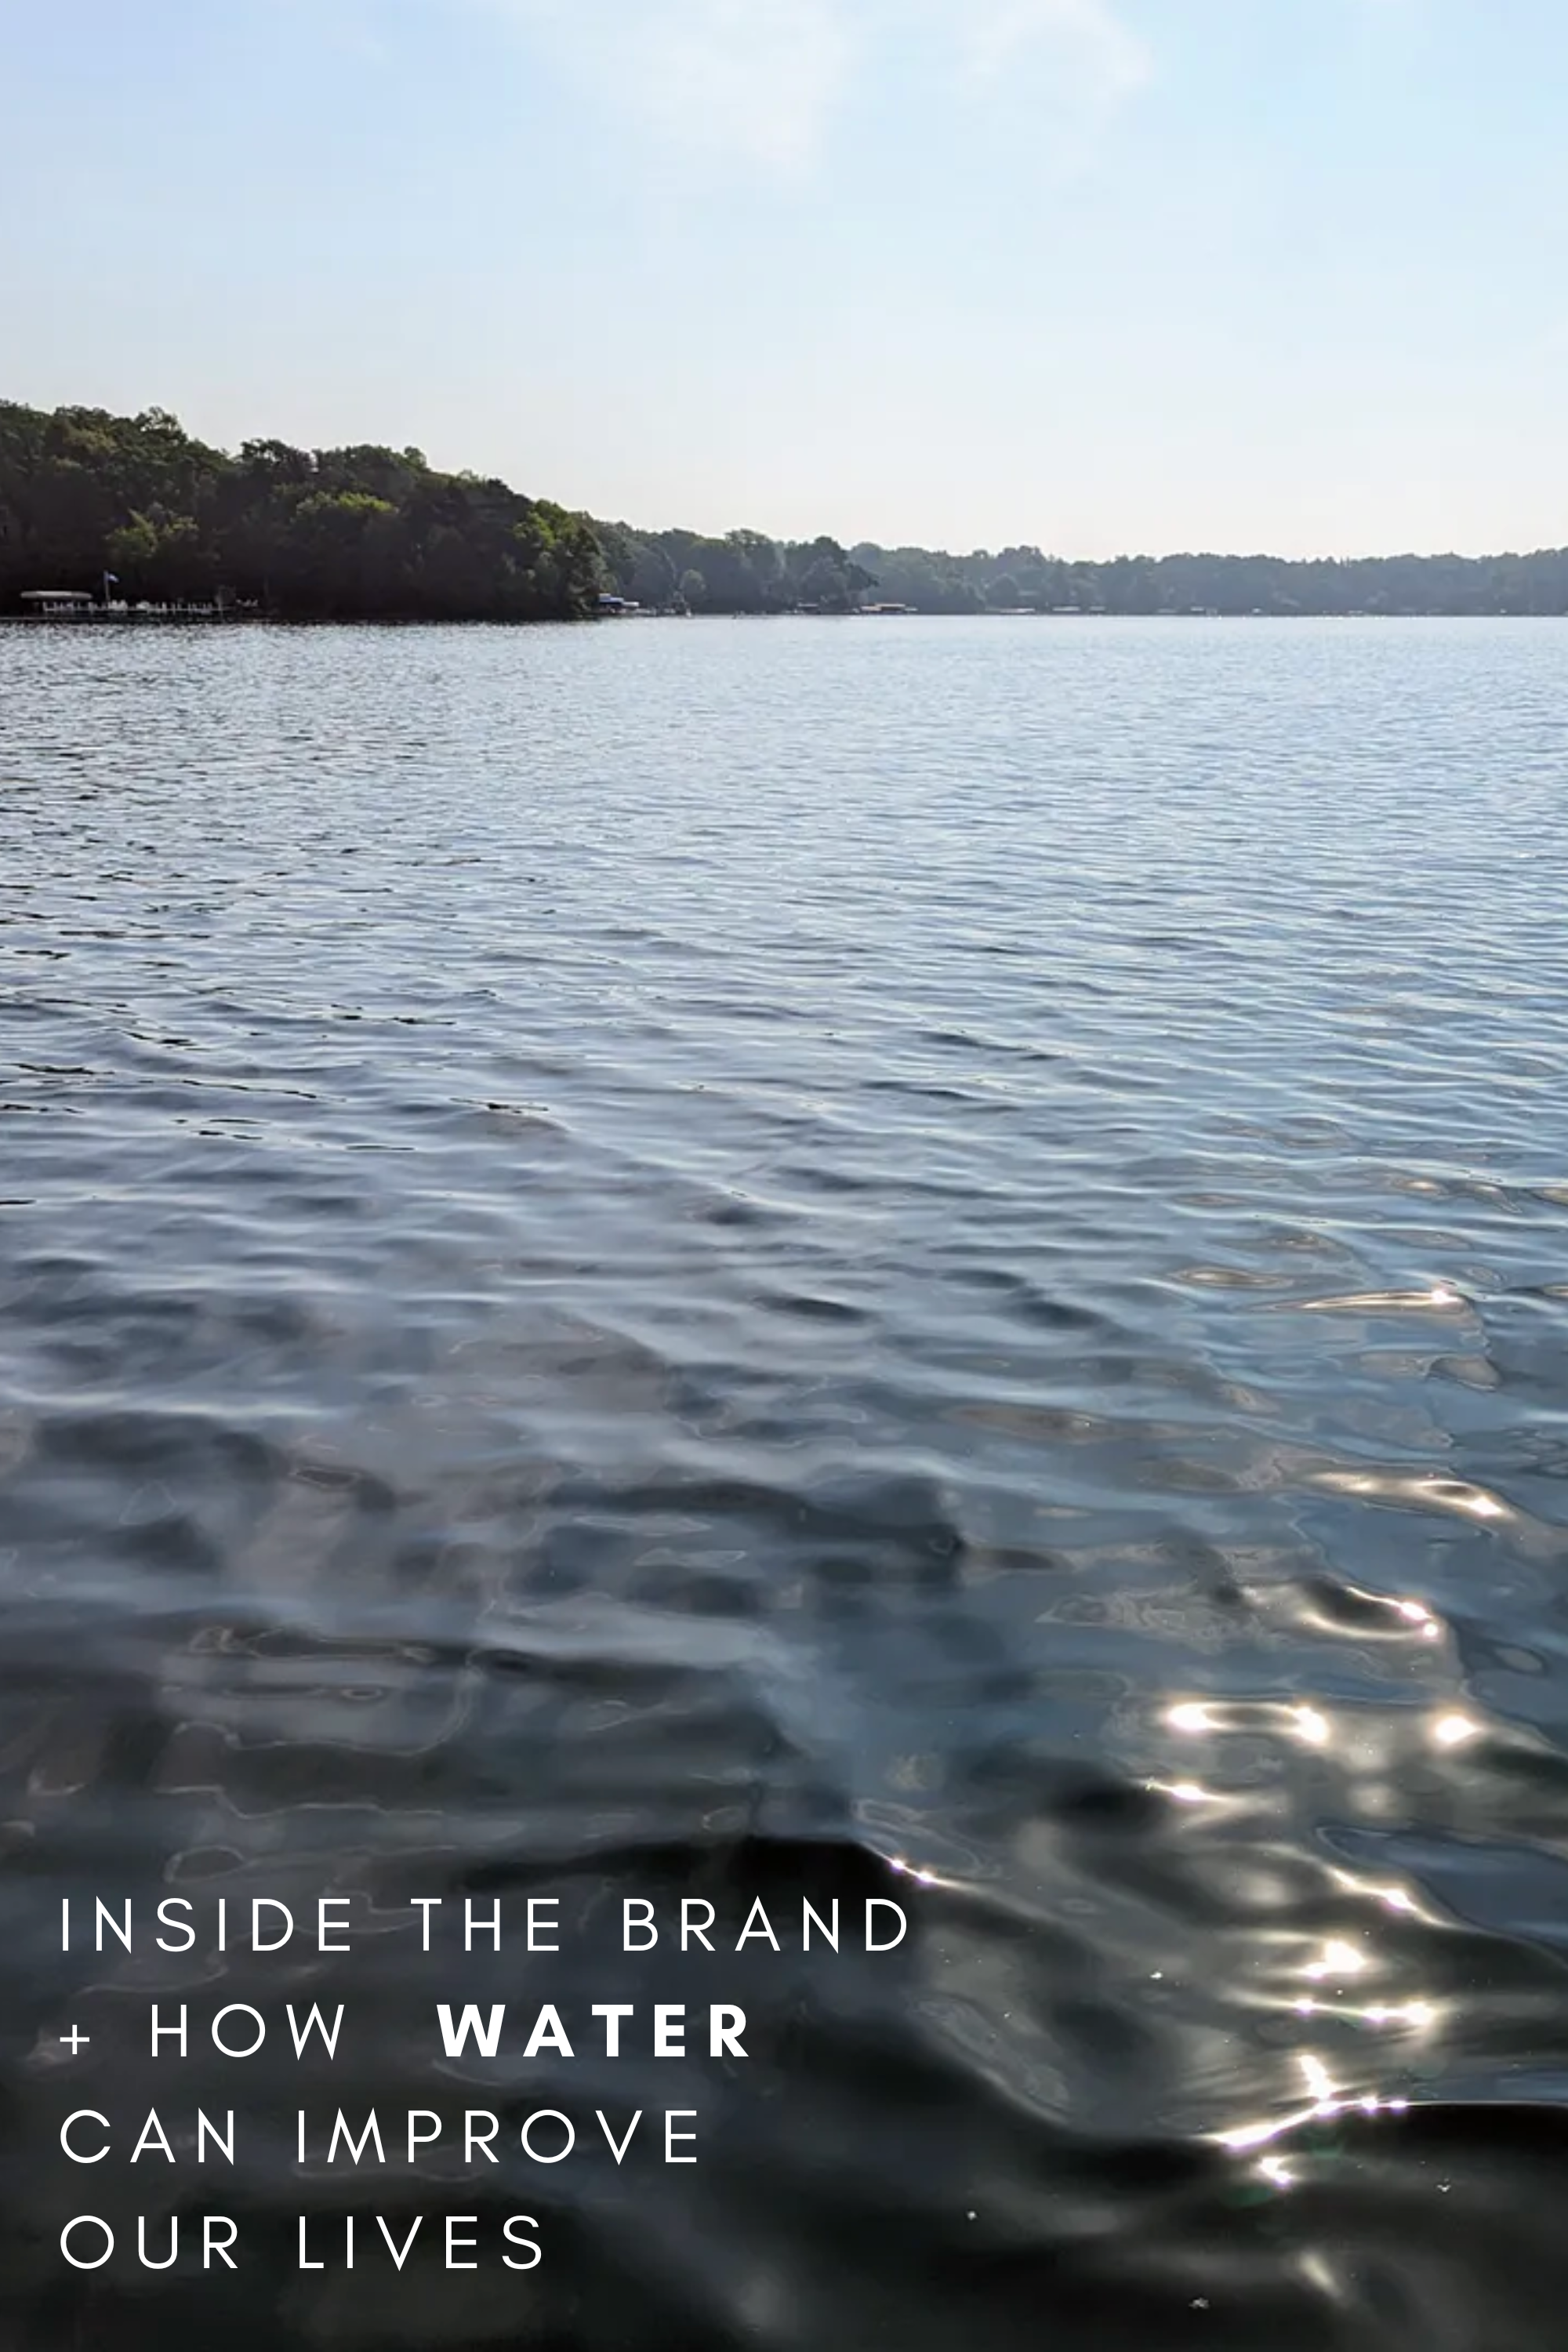 Behind the Brand + How WATER Improves Our Lives